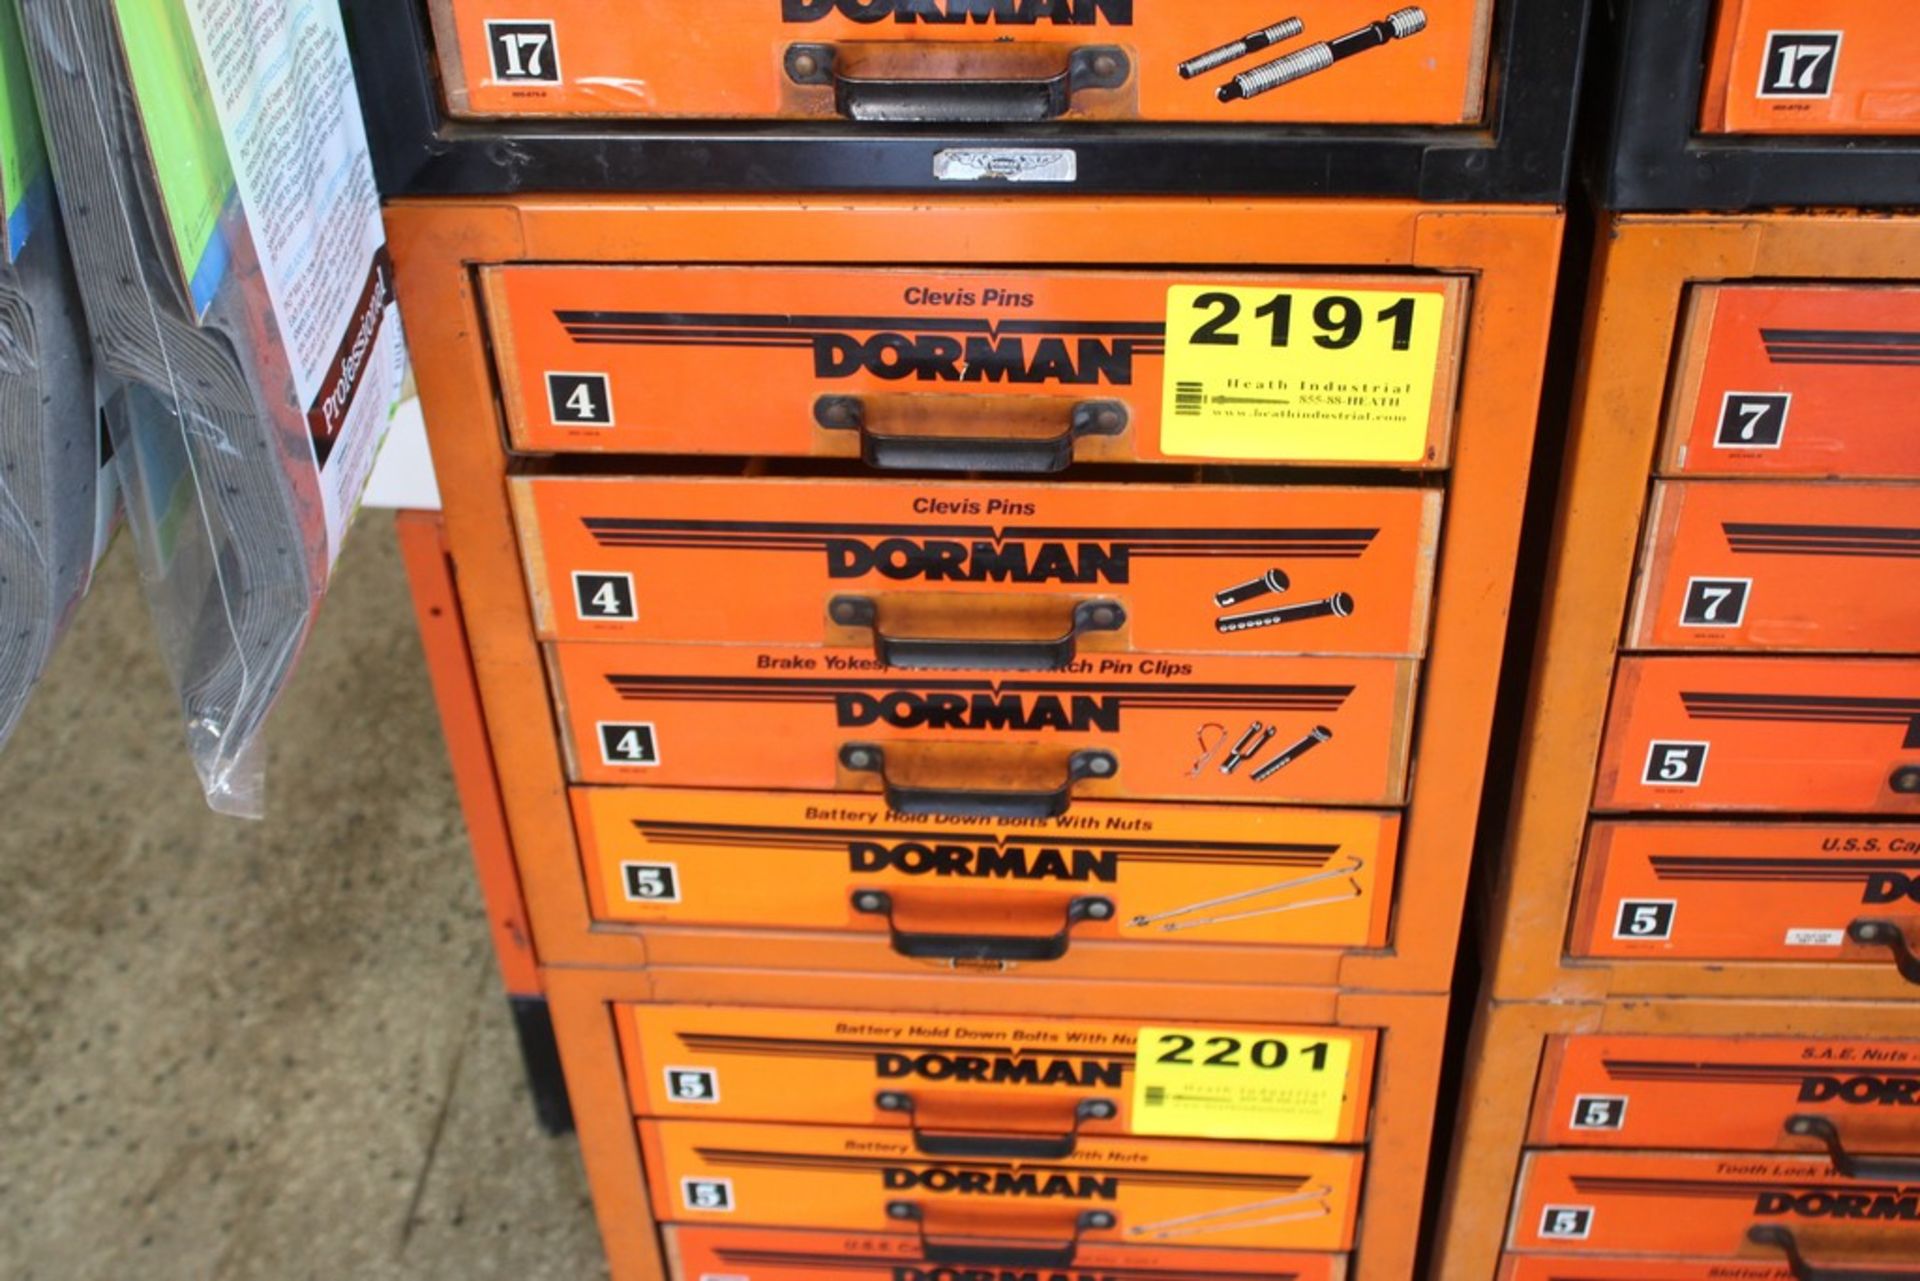 DORMAN FOUR DRAWER CABINET, CONTENTS INCLUDES CLEVIS PINS, BRAKE YOKES AND HOLD DOWNS